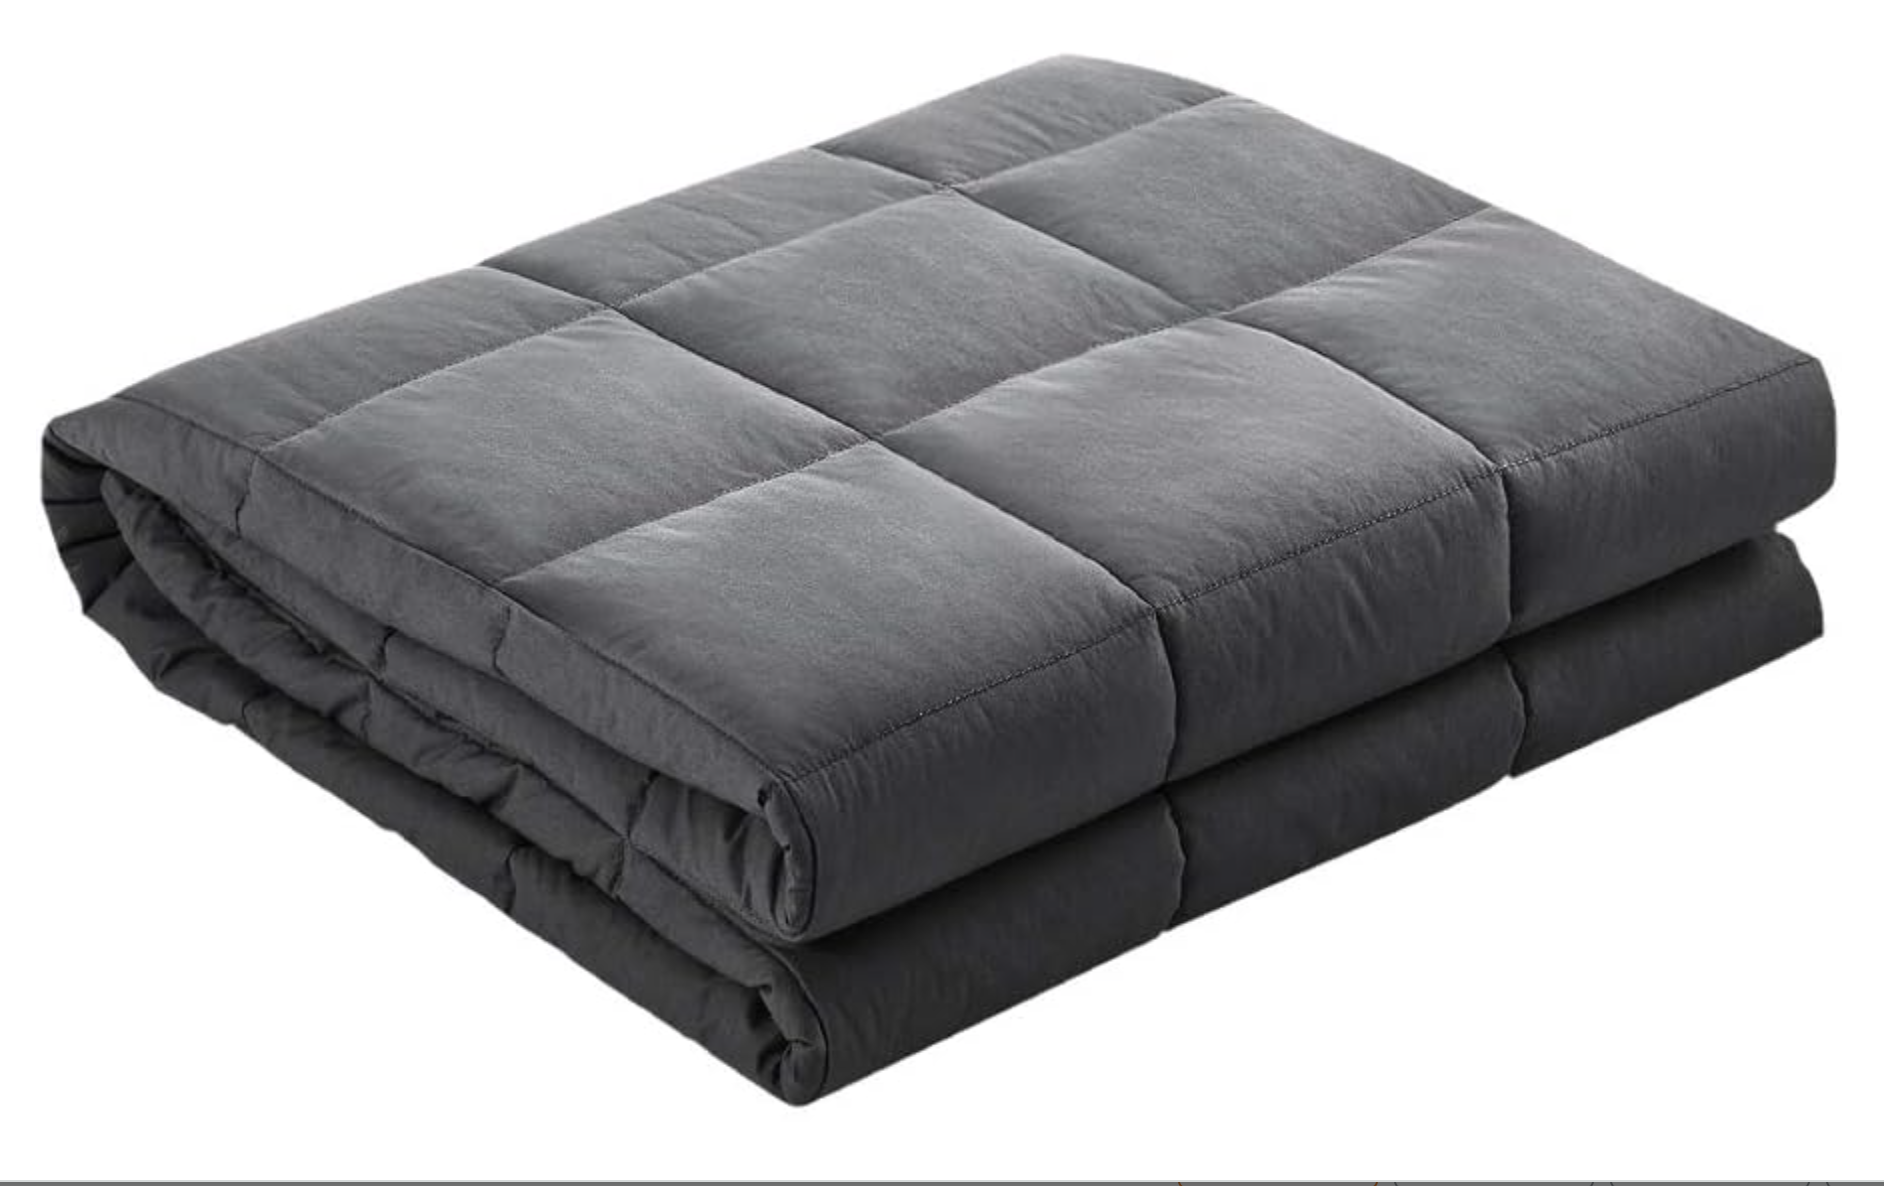 Giselle Bedding Weighted Blanket 11KG (Copy)